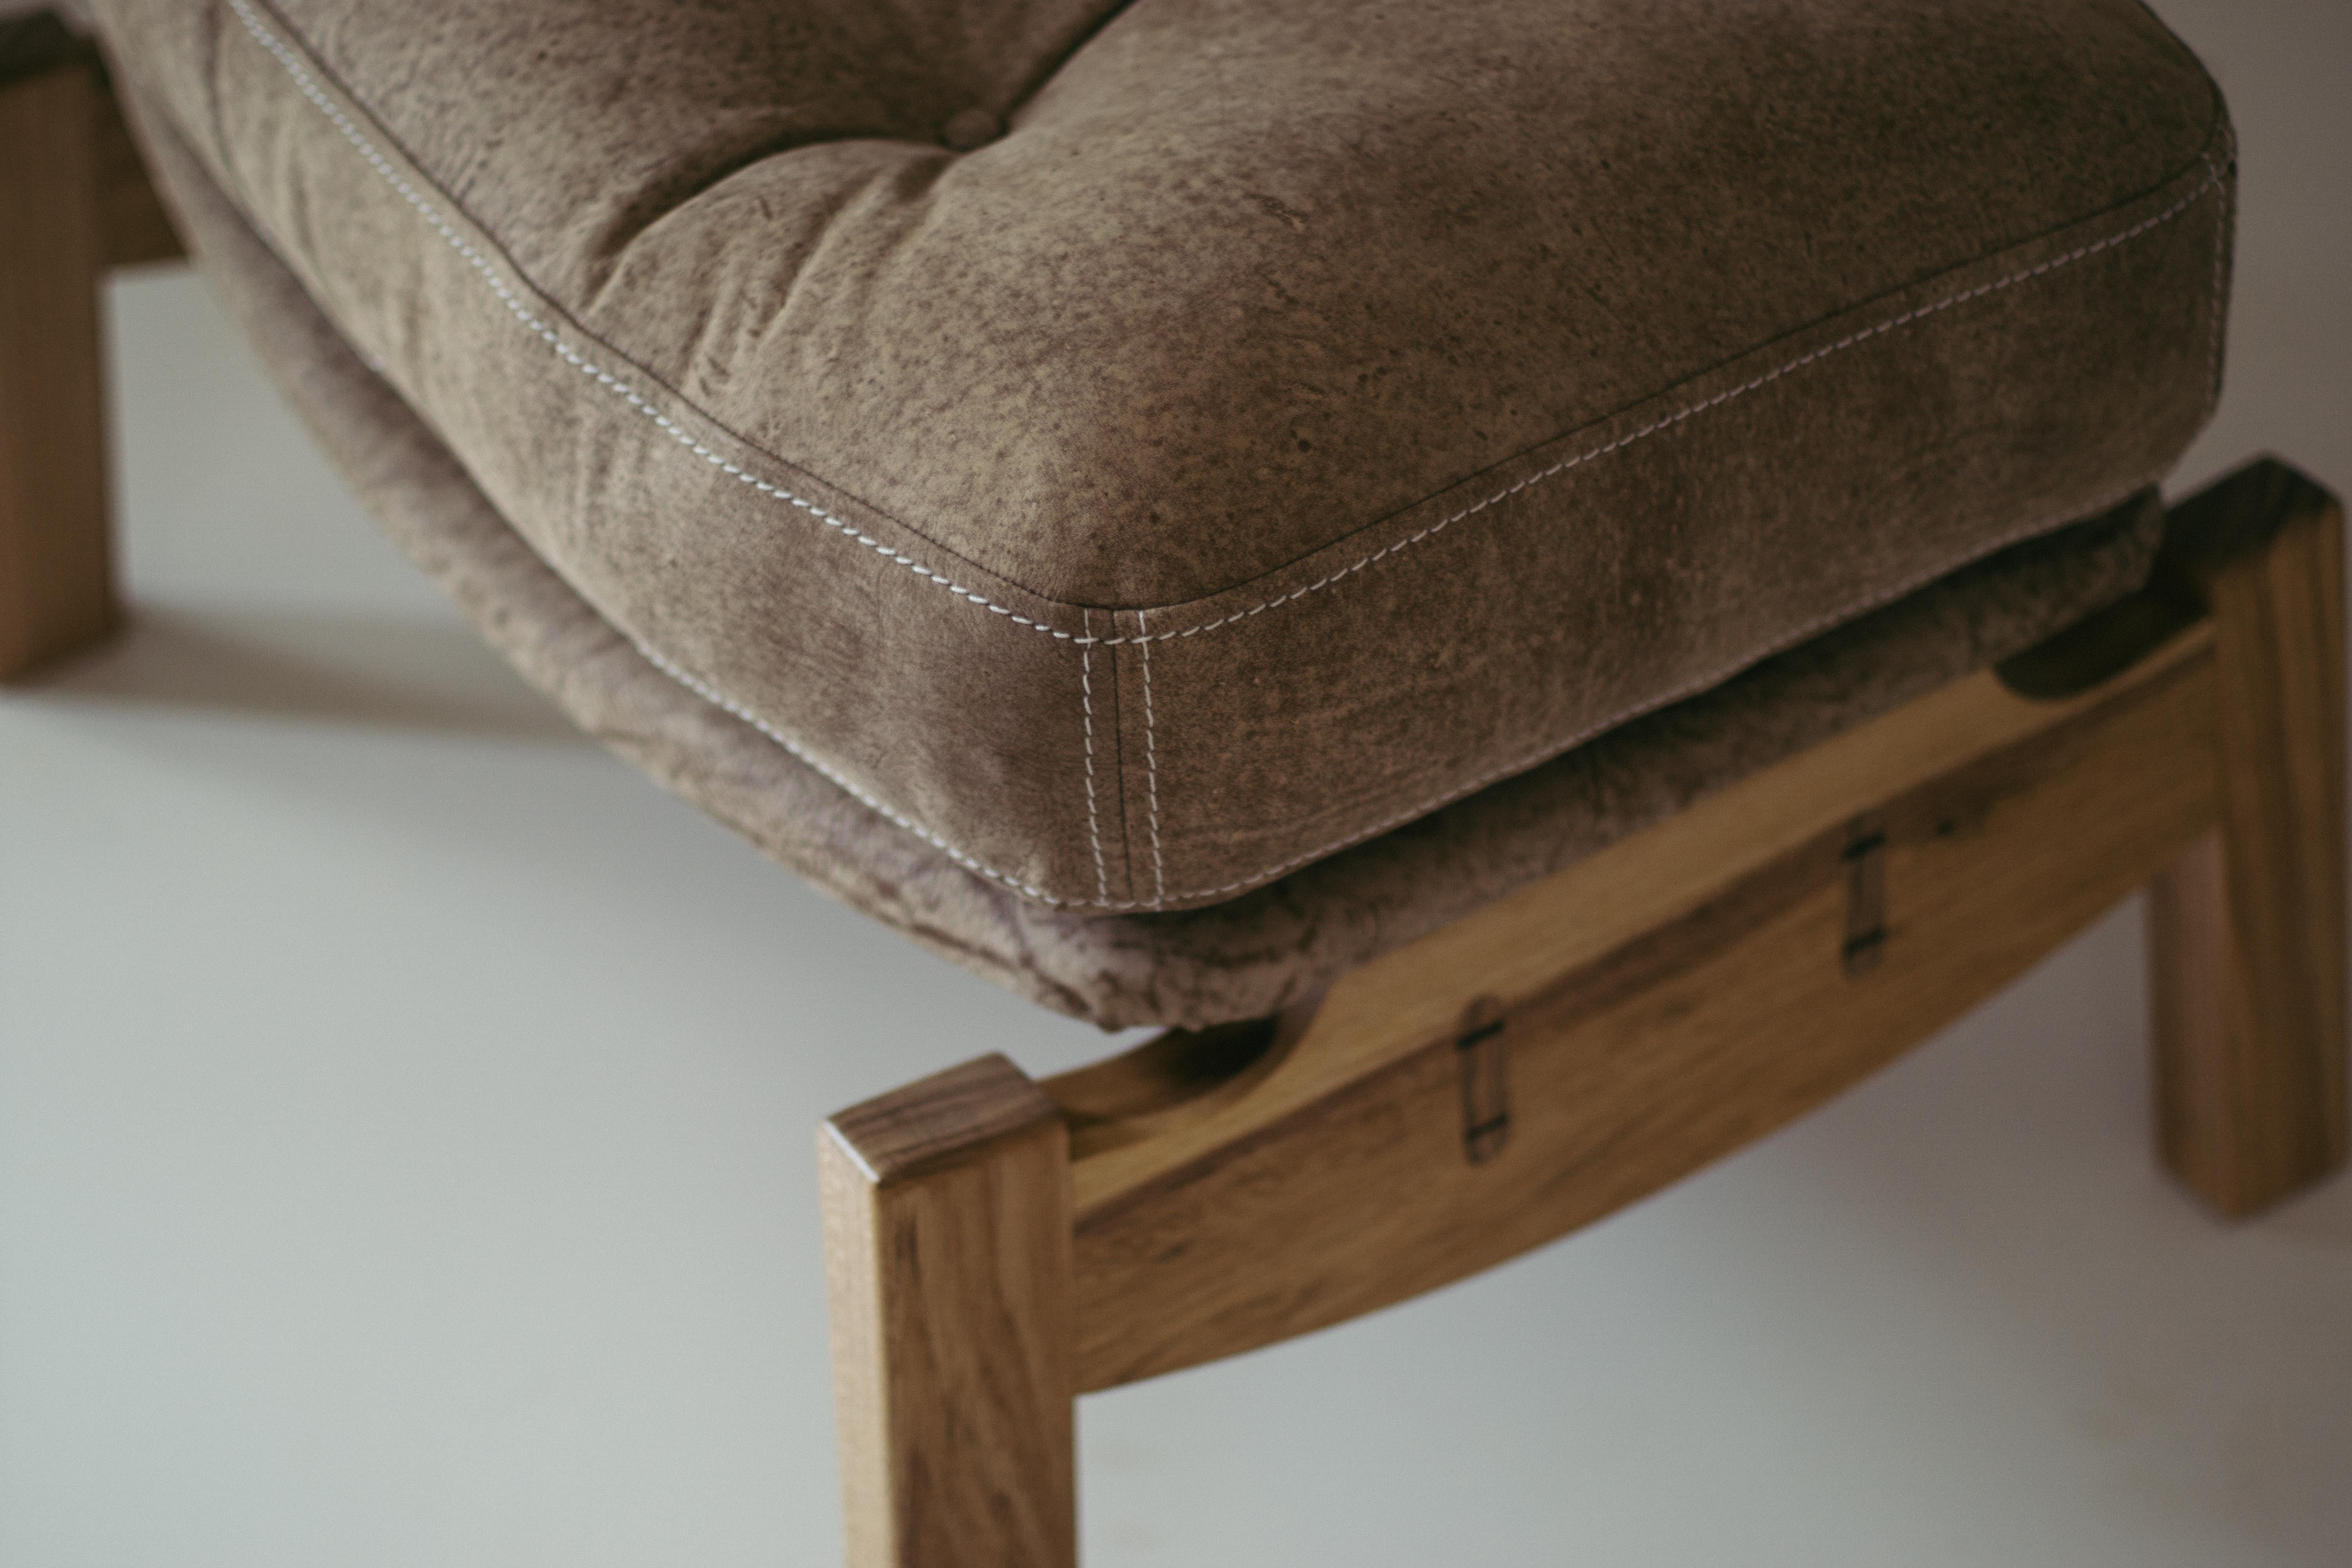 The Hoop footstool is made of solid wood, upholstered in natural leather.